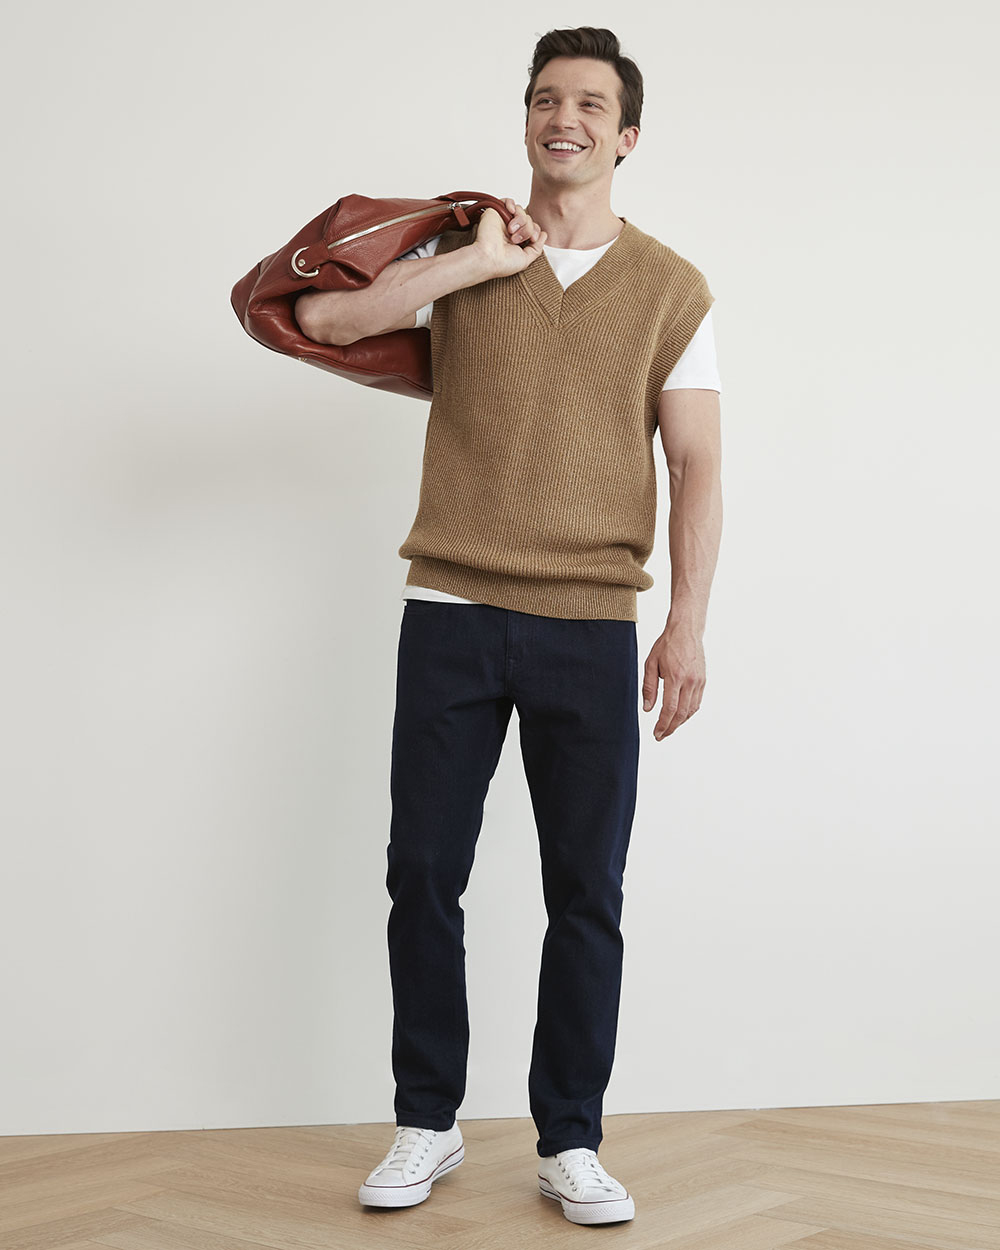 model wearing sweater vest and pants